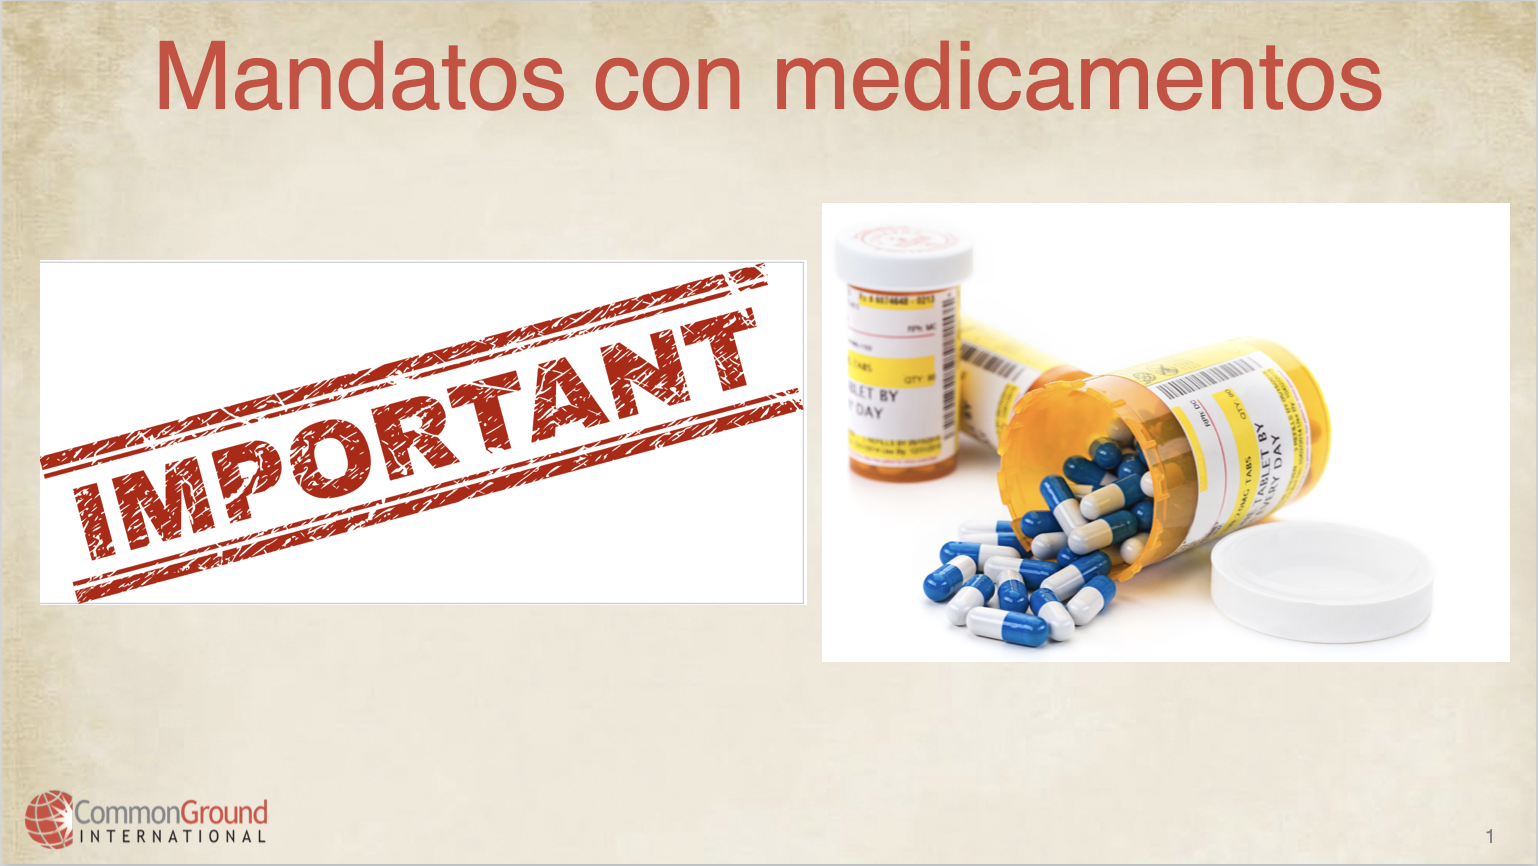 Commands and Medication Instructions in Spanish